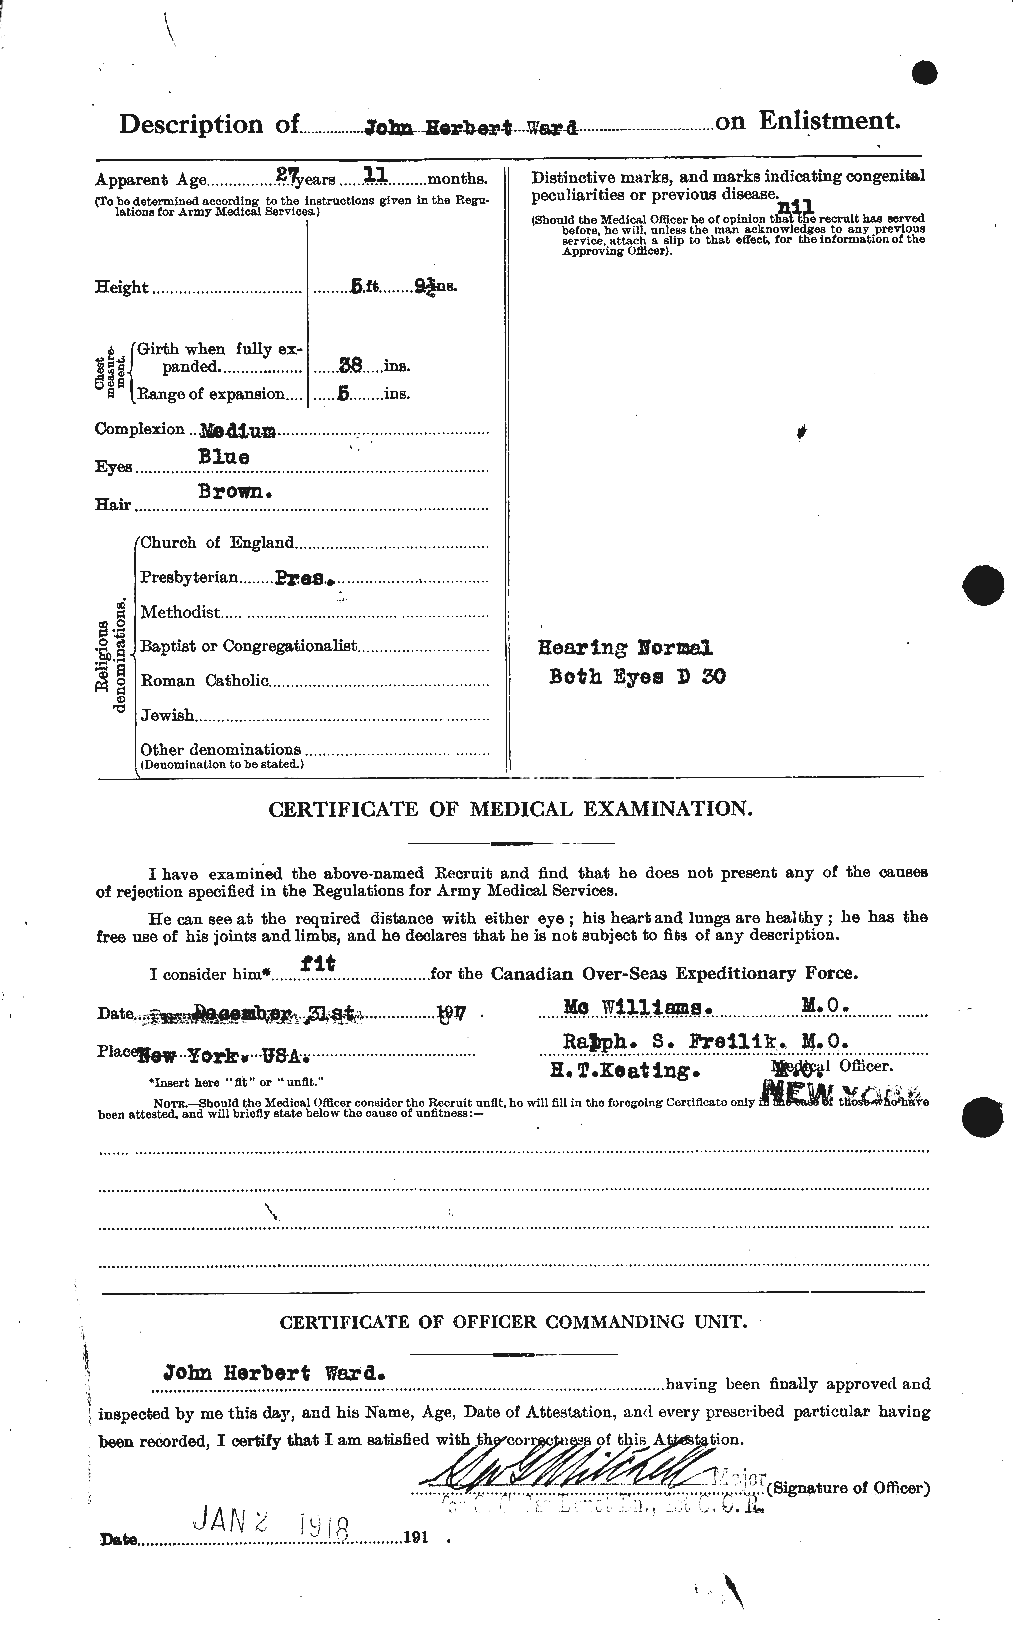 Personnel Records of the First World War - CEF 659527b